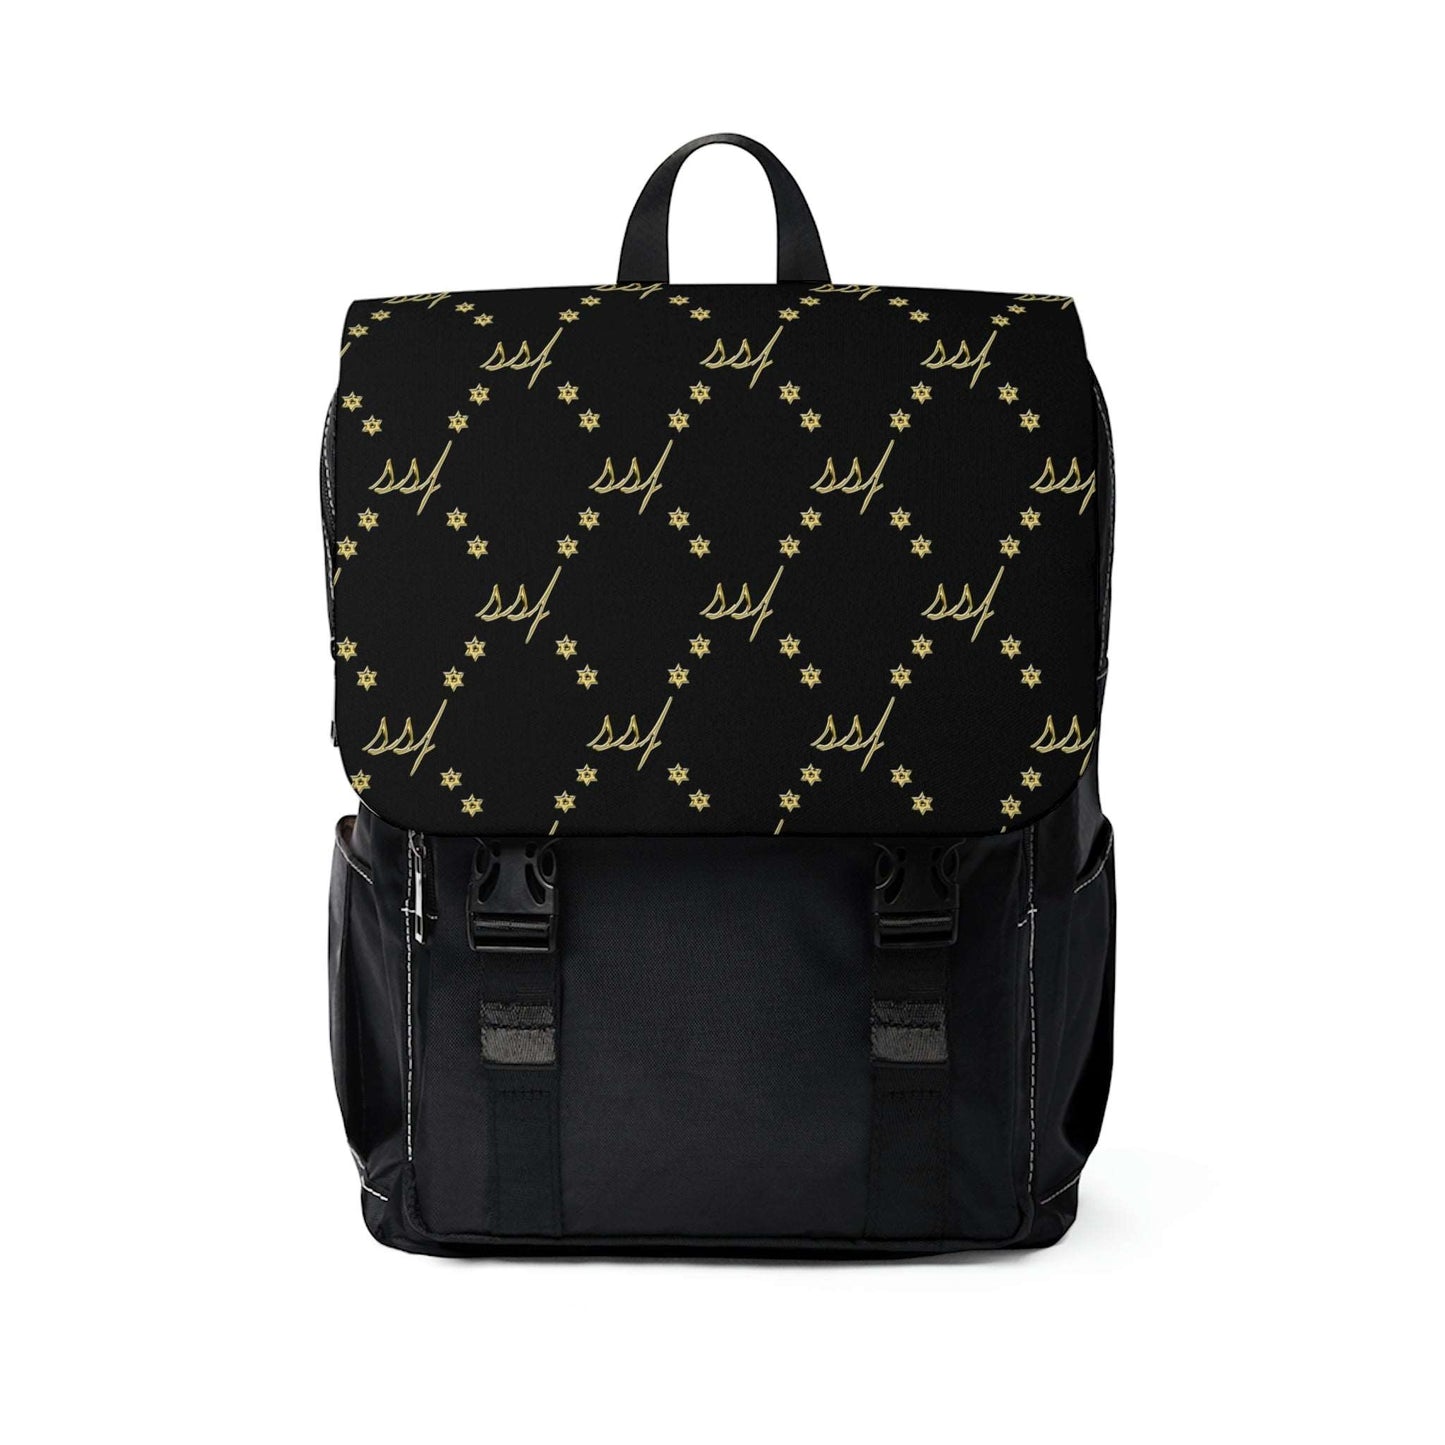 SSF Backpack in Gold